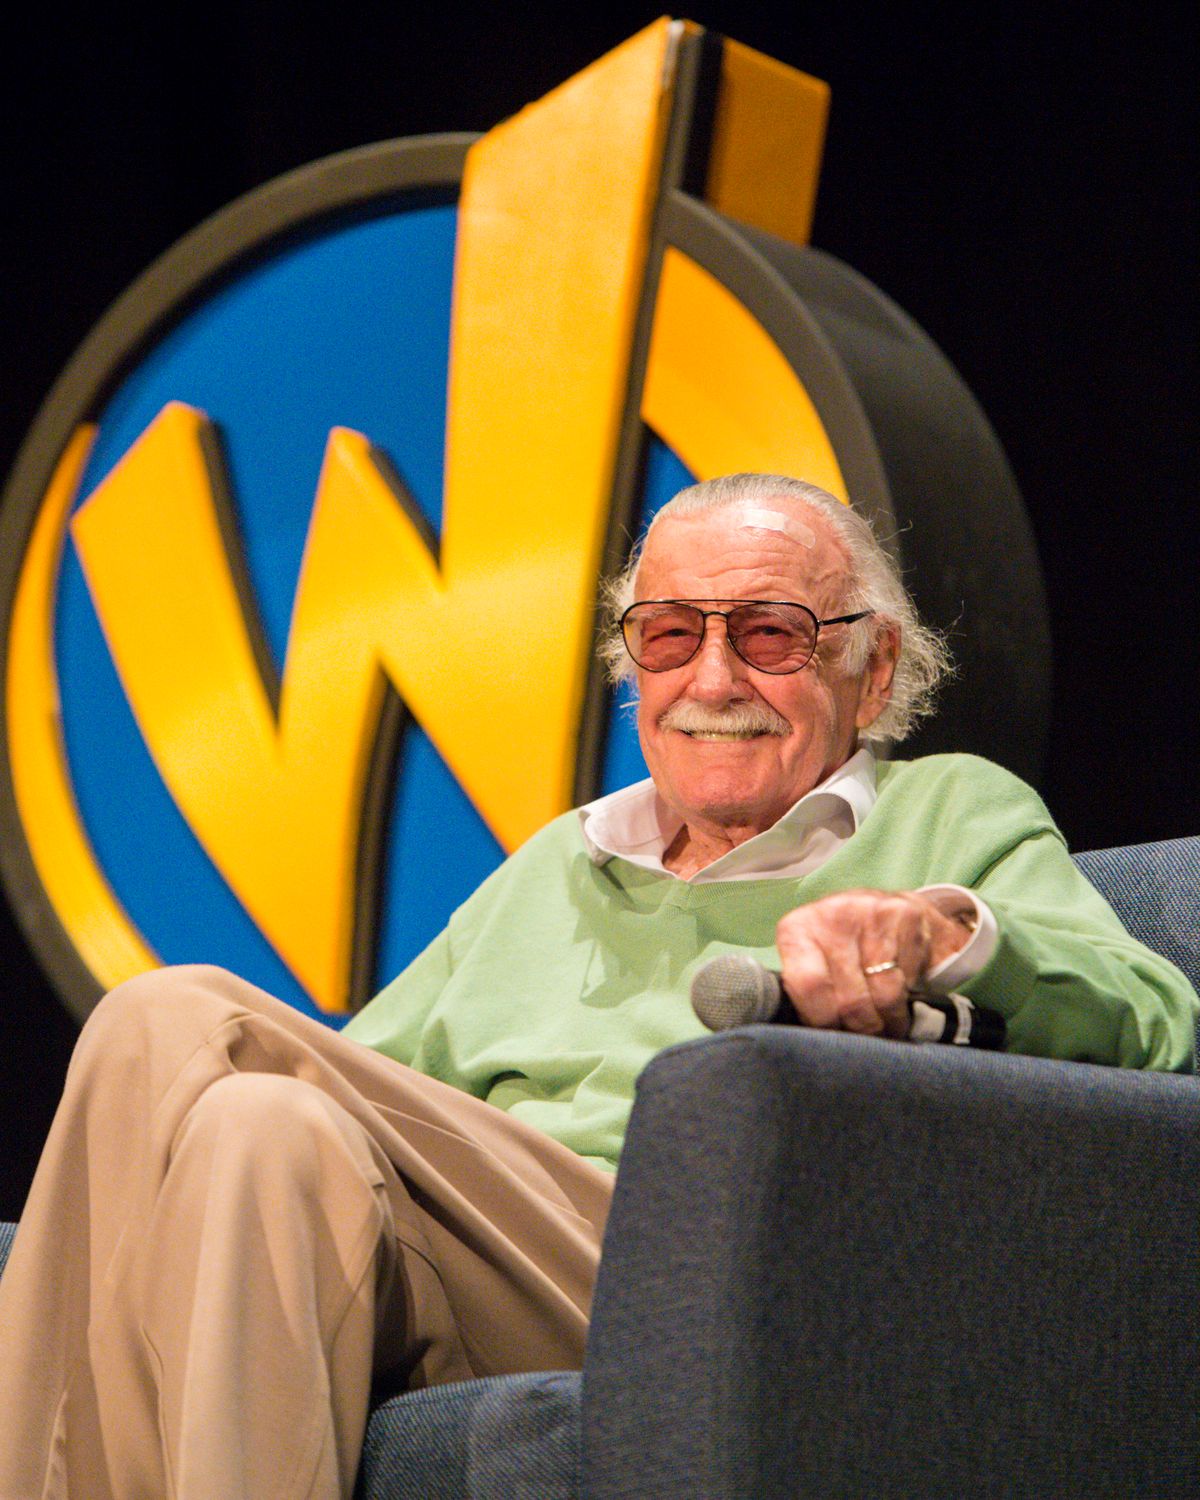 Stan Lee during a Q&A at Wizard World Comic Con at Ernest N. Morial Convention Center on January 6, 2018 | Photo: Getty Images